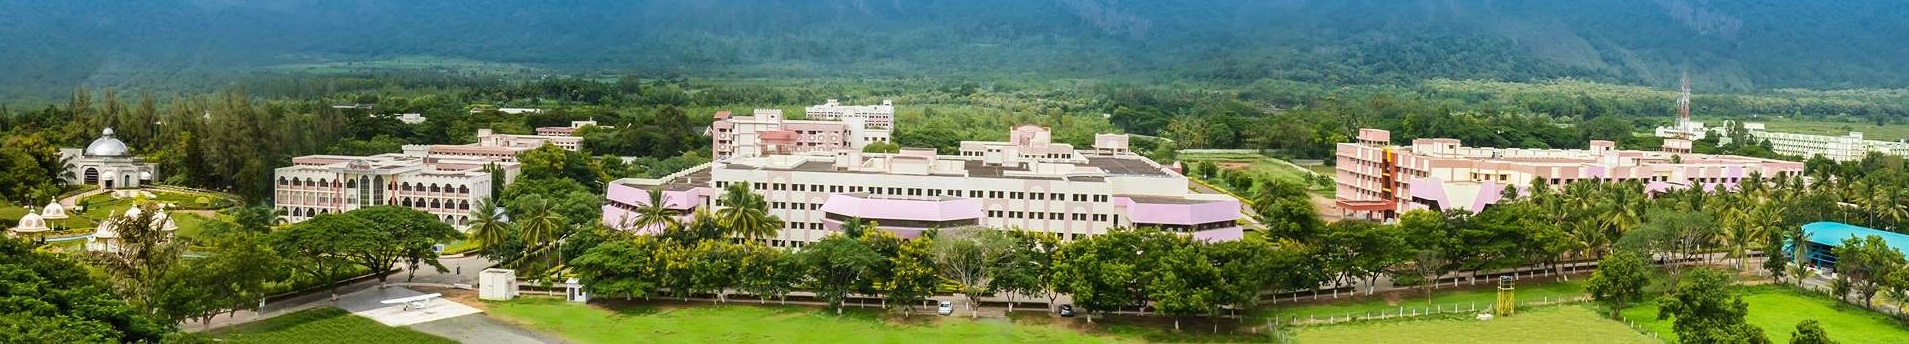 Karunya Institute of Technology and Sciences, Coimbatore Image